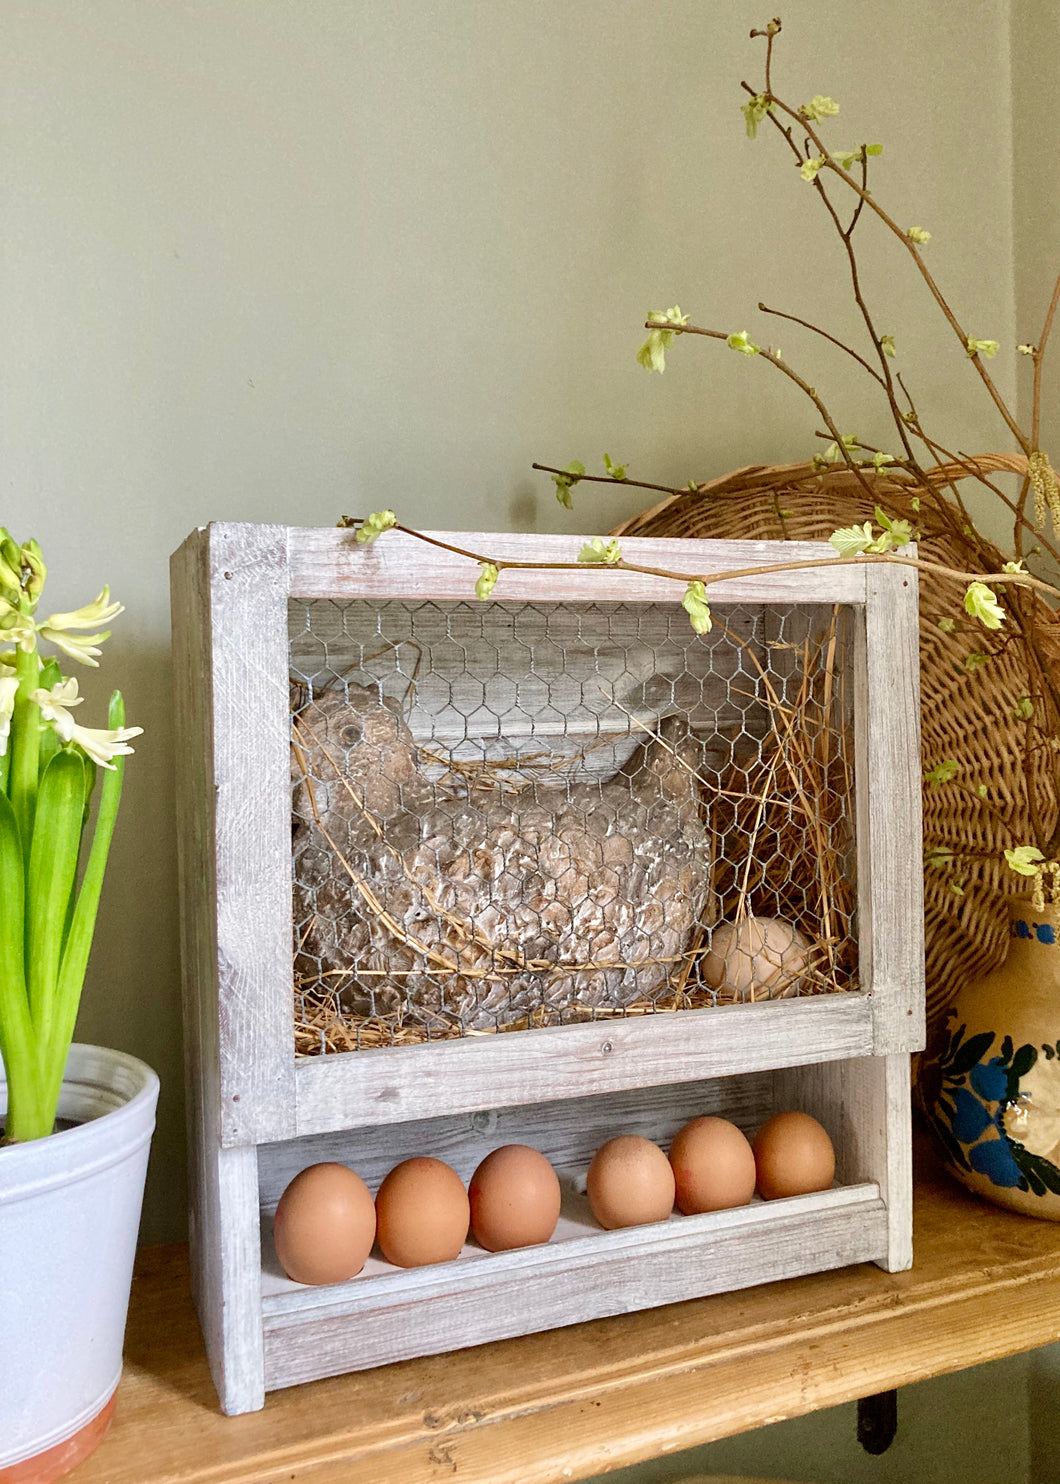 Rustic pottery chicken in nesting box with egg rack